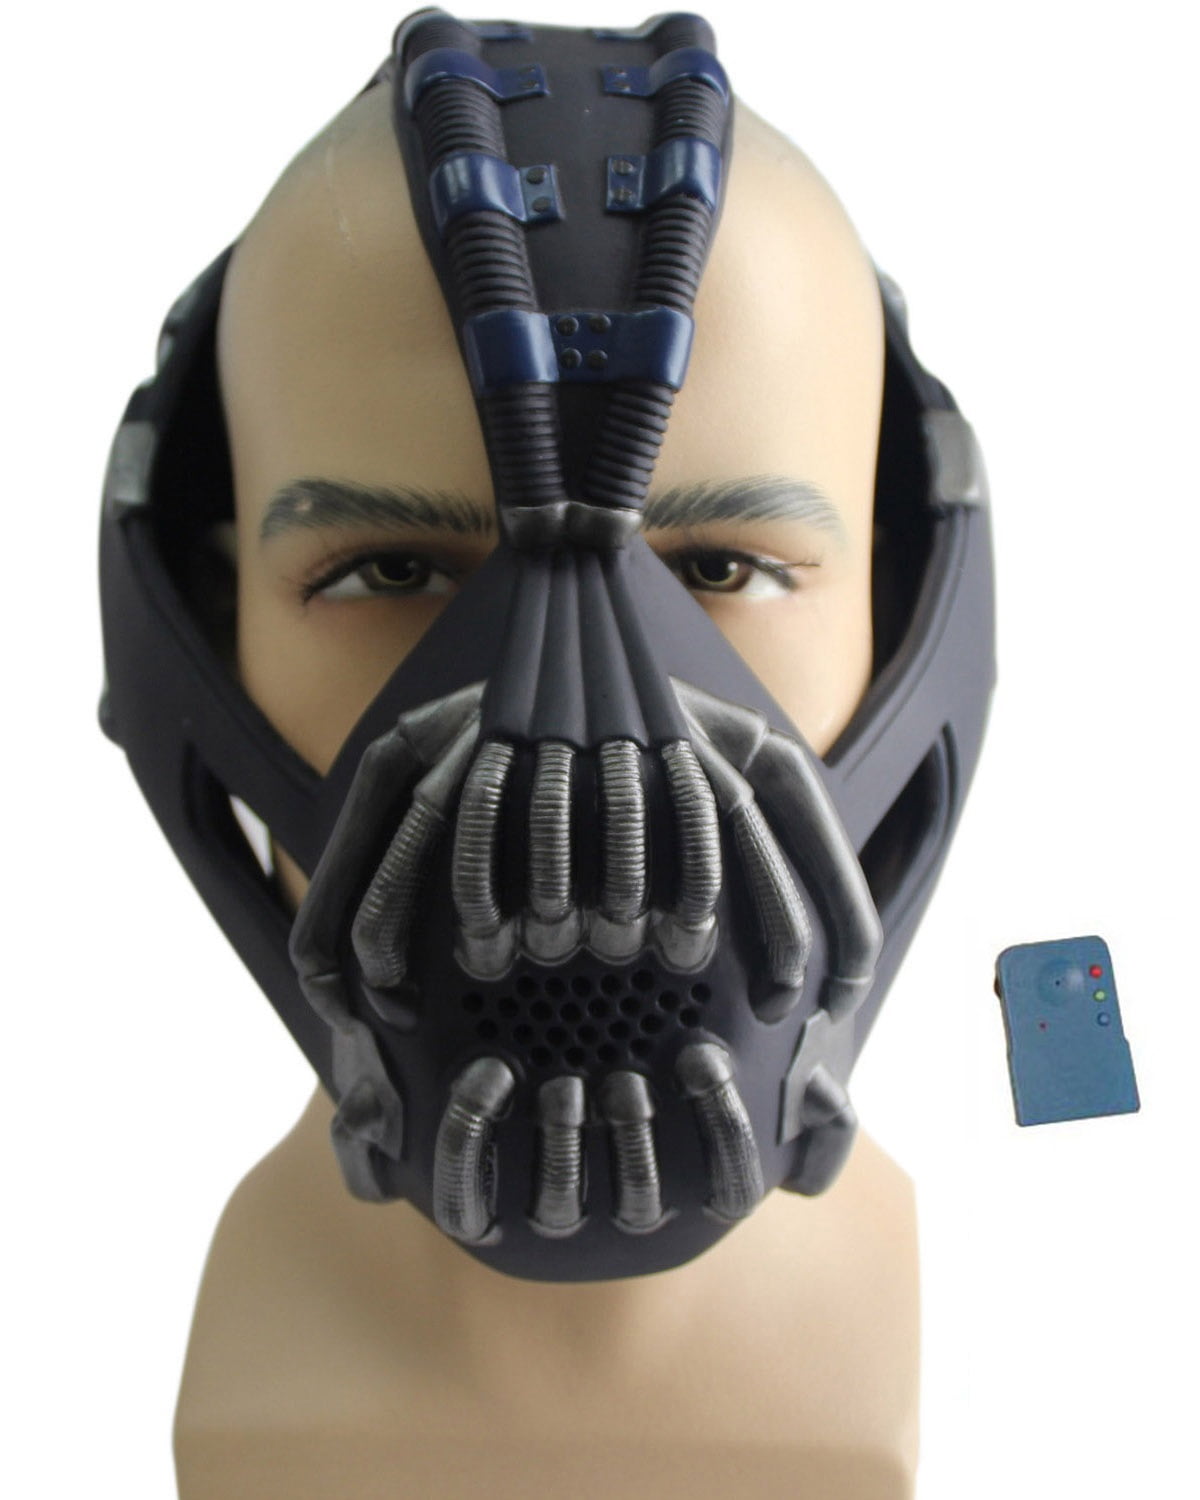 Bane Mask+Voice Changer Batman Cosplay Costume The Dark Knight Rises Metal  Color Version 2 Accessories Props Xcoser 